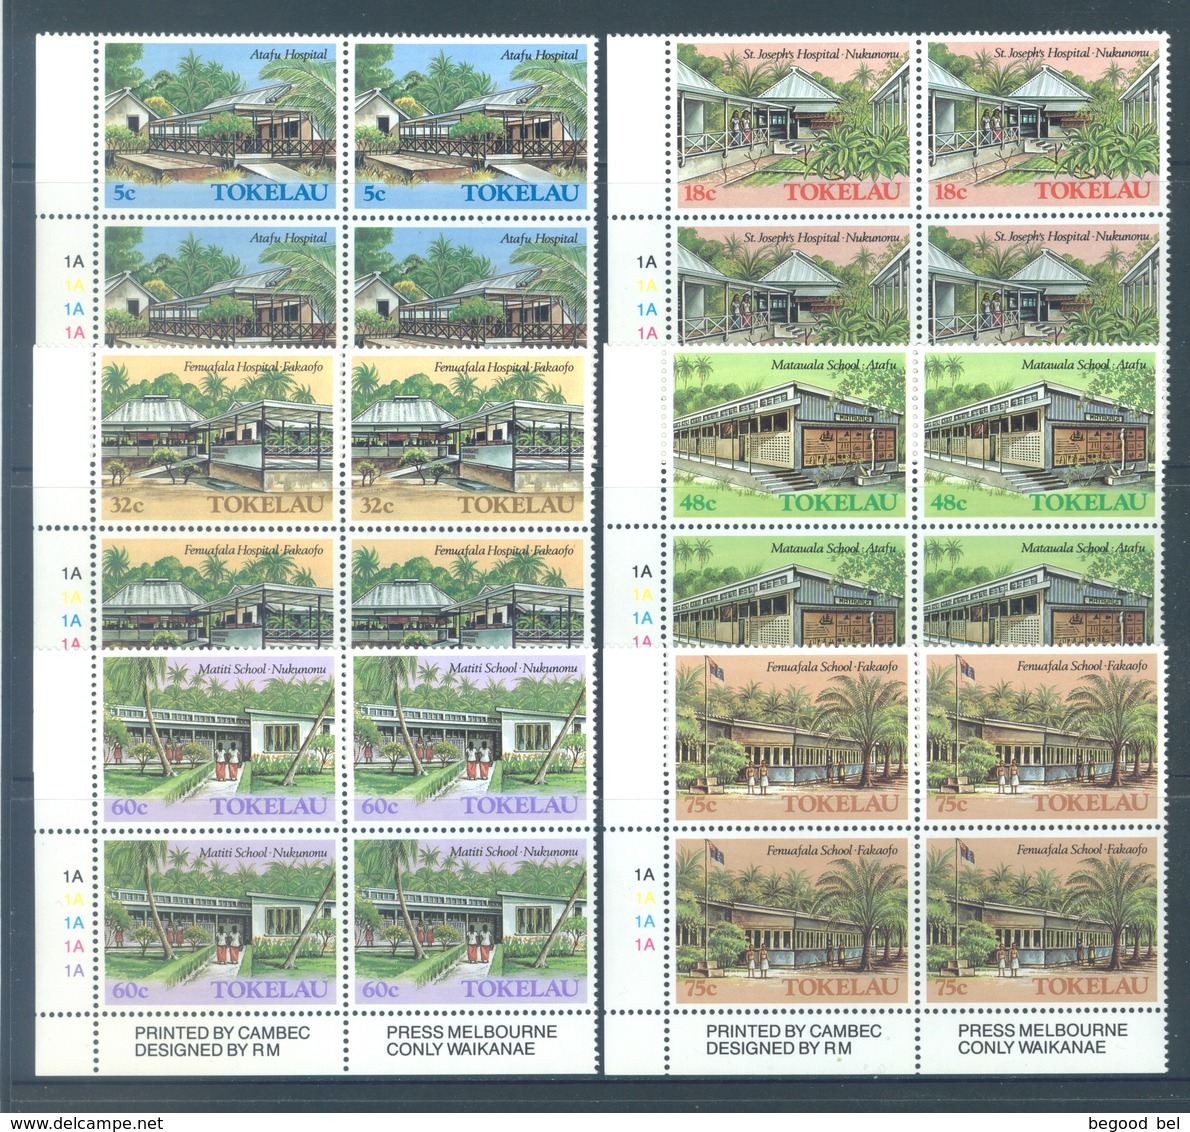 TOKELAU - MNH/** - 1986  - MONUMENTS - Yv 130-135 -  Lot 18377 IN BLOC OF 4 STAMPS - Tokelau